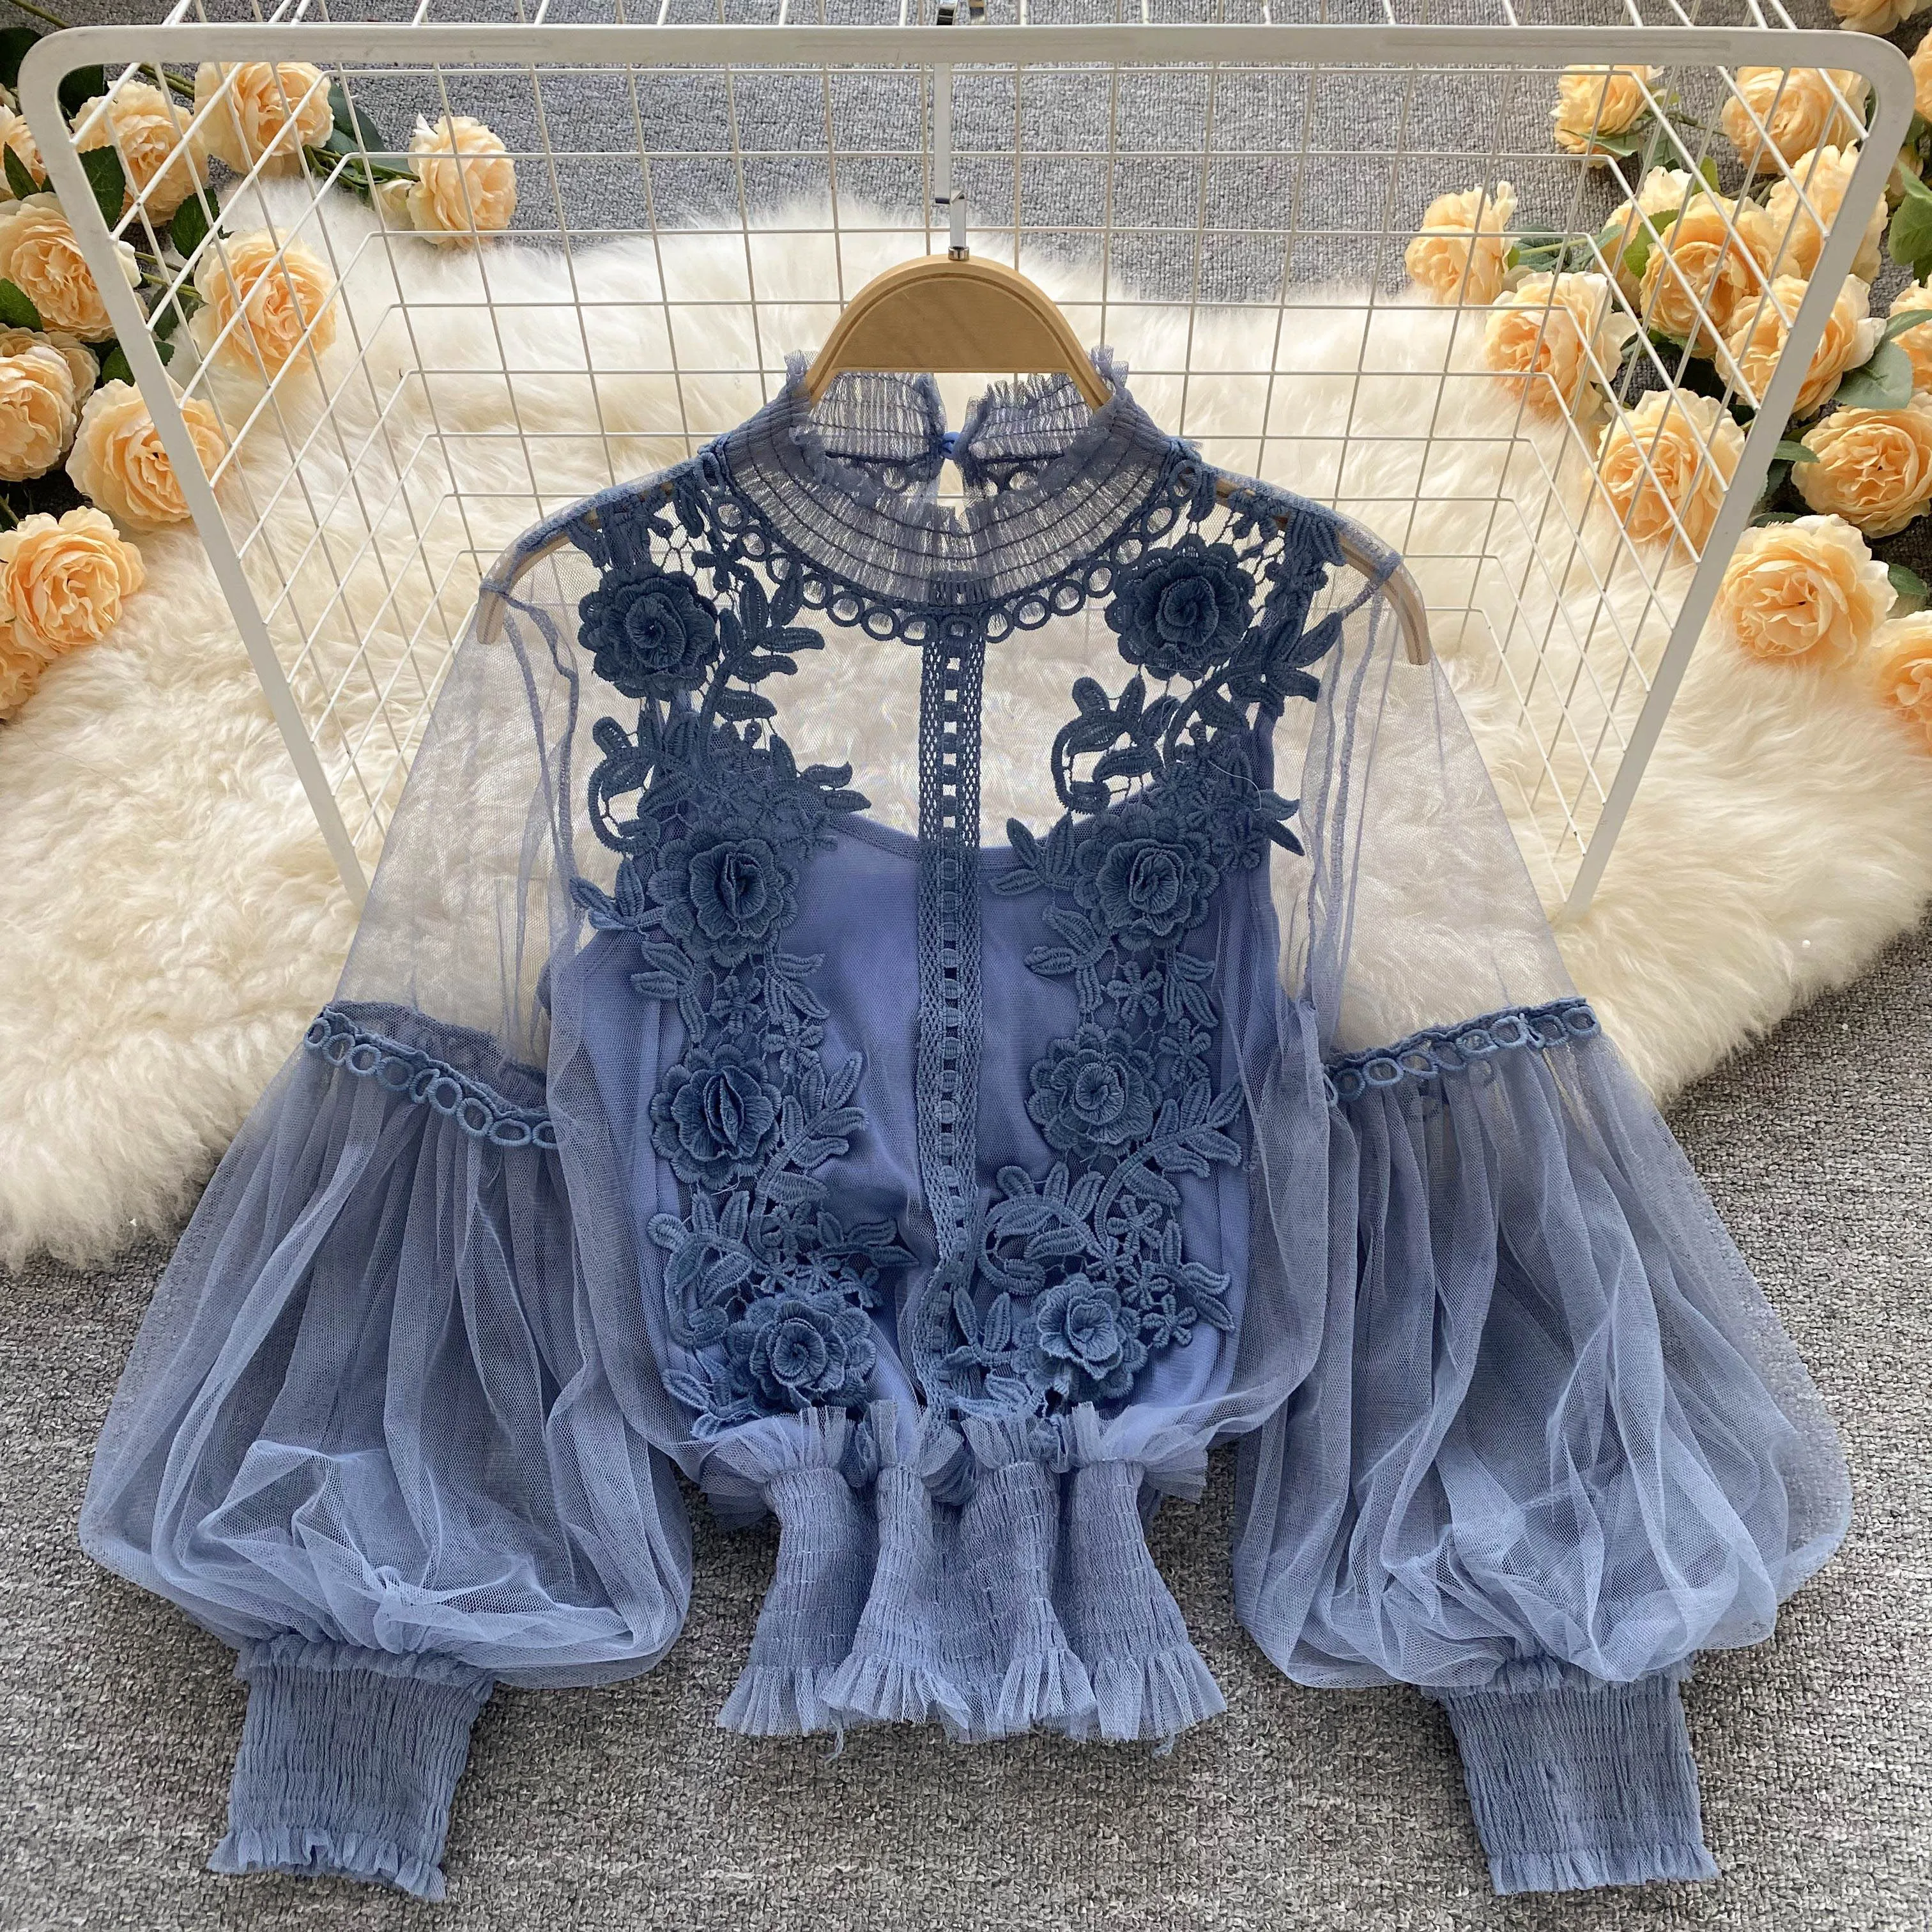 Design three-dimensional flower collage perspective mesh lantern sleeve slim short style tops lace base women blouse